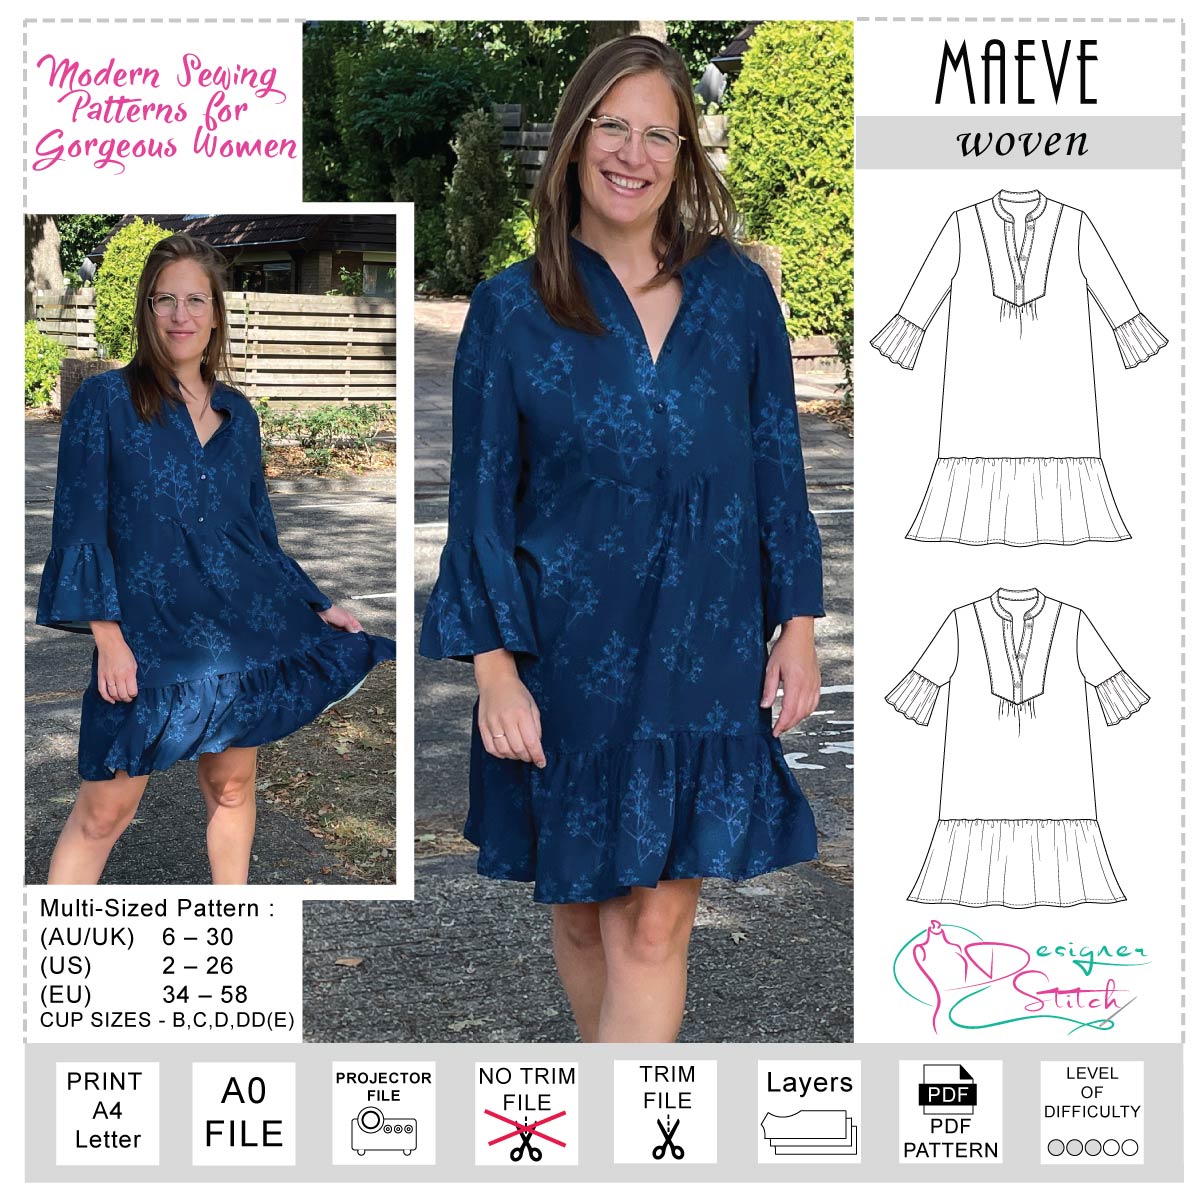 Sew the Maeve Nightgown